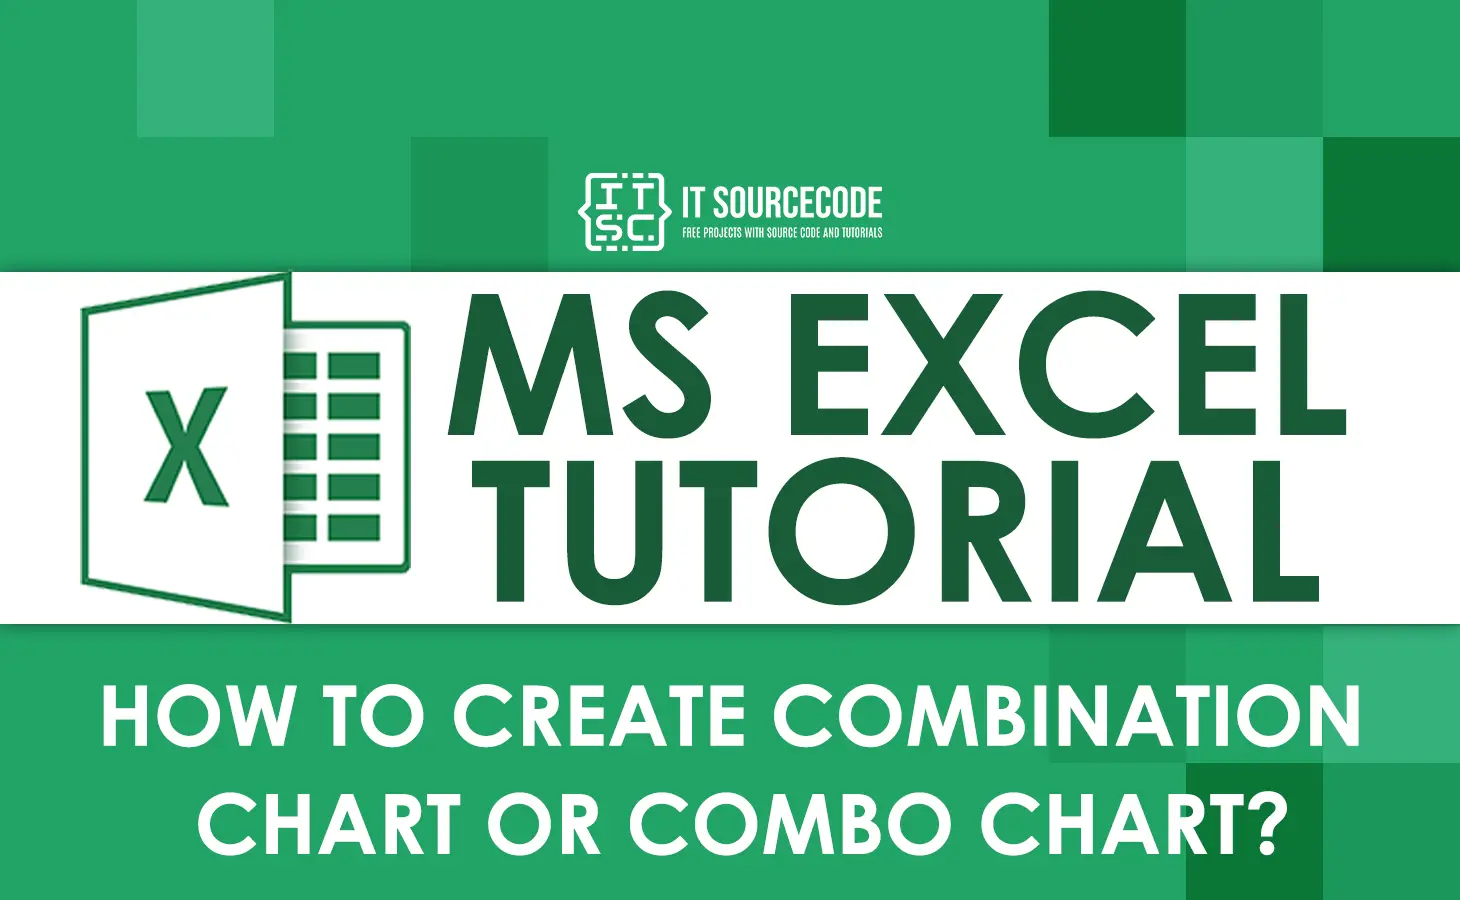 How To Create Combination Chart In Excel Step-by-Step Guide